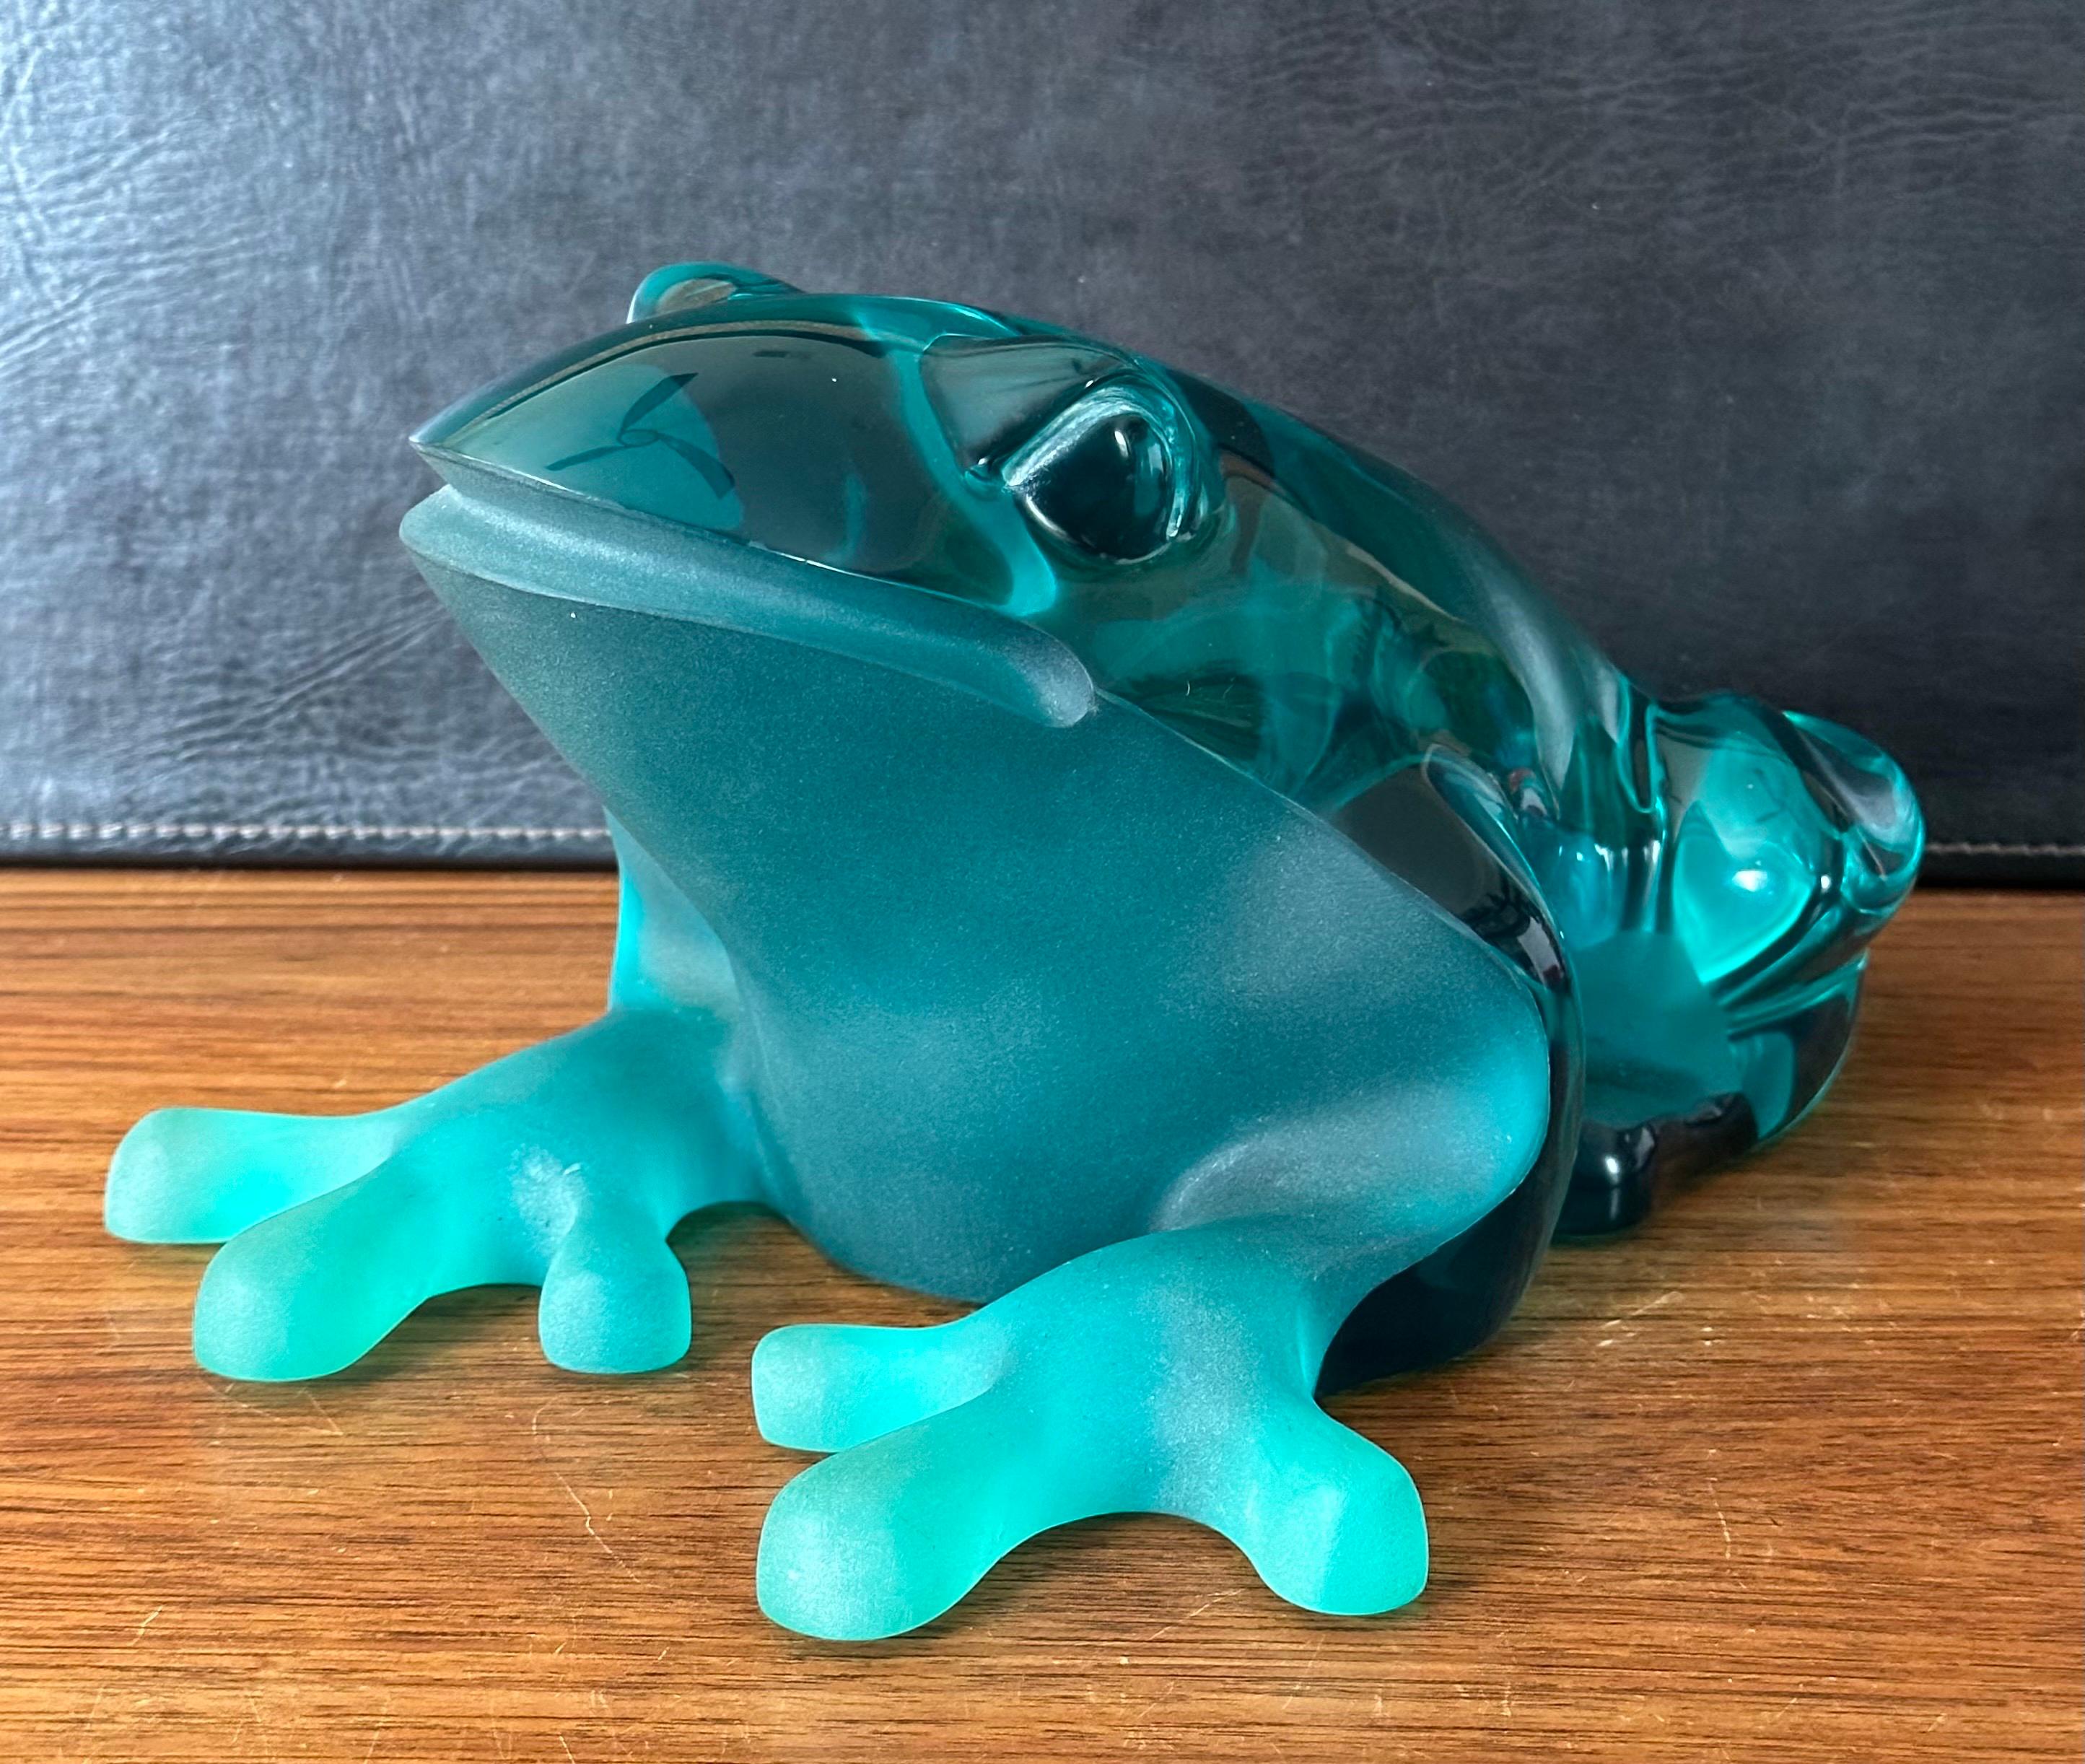 Massive green lucite frog sculpture by Israeli artist, Shlomi Haziza, circa early 1990s. The piece is in very good vintage condition with no chips or cracks and measures: 10